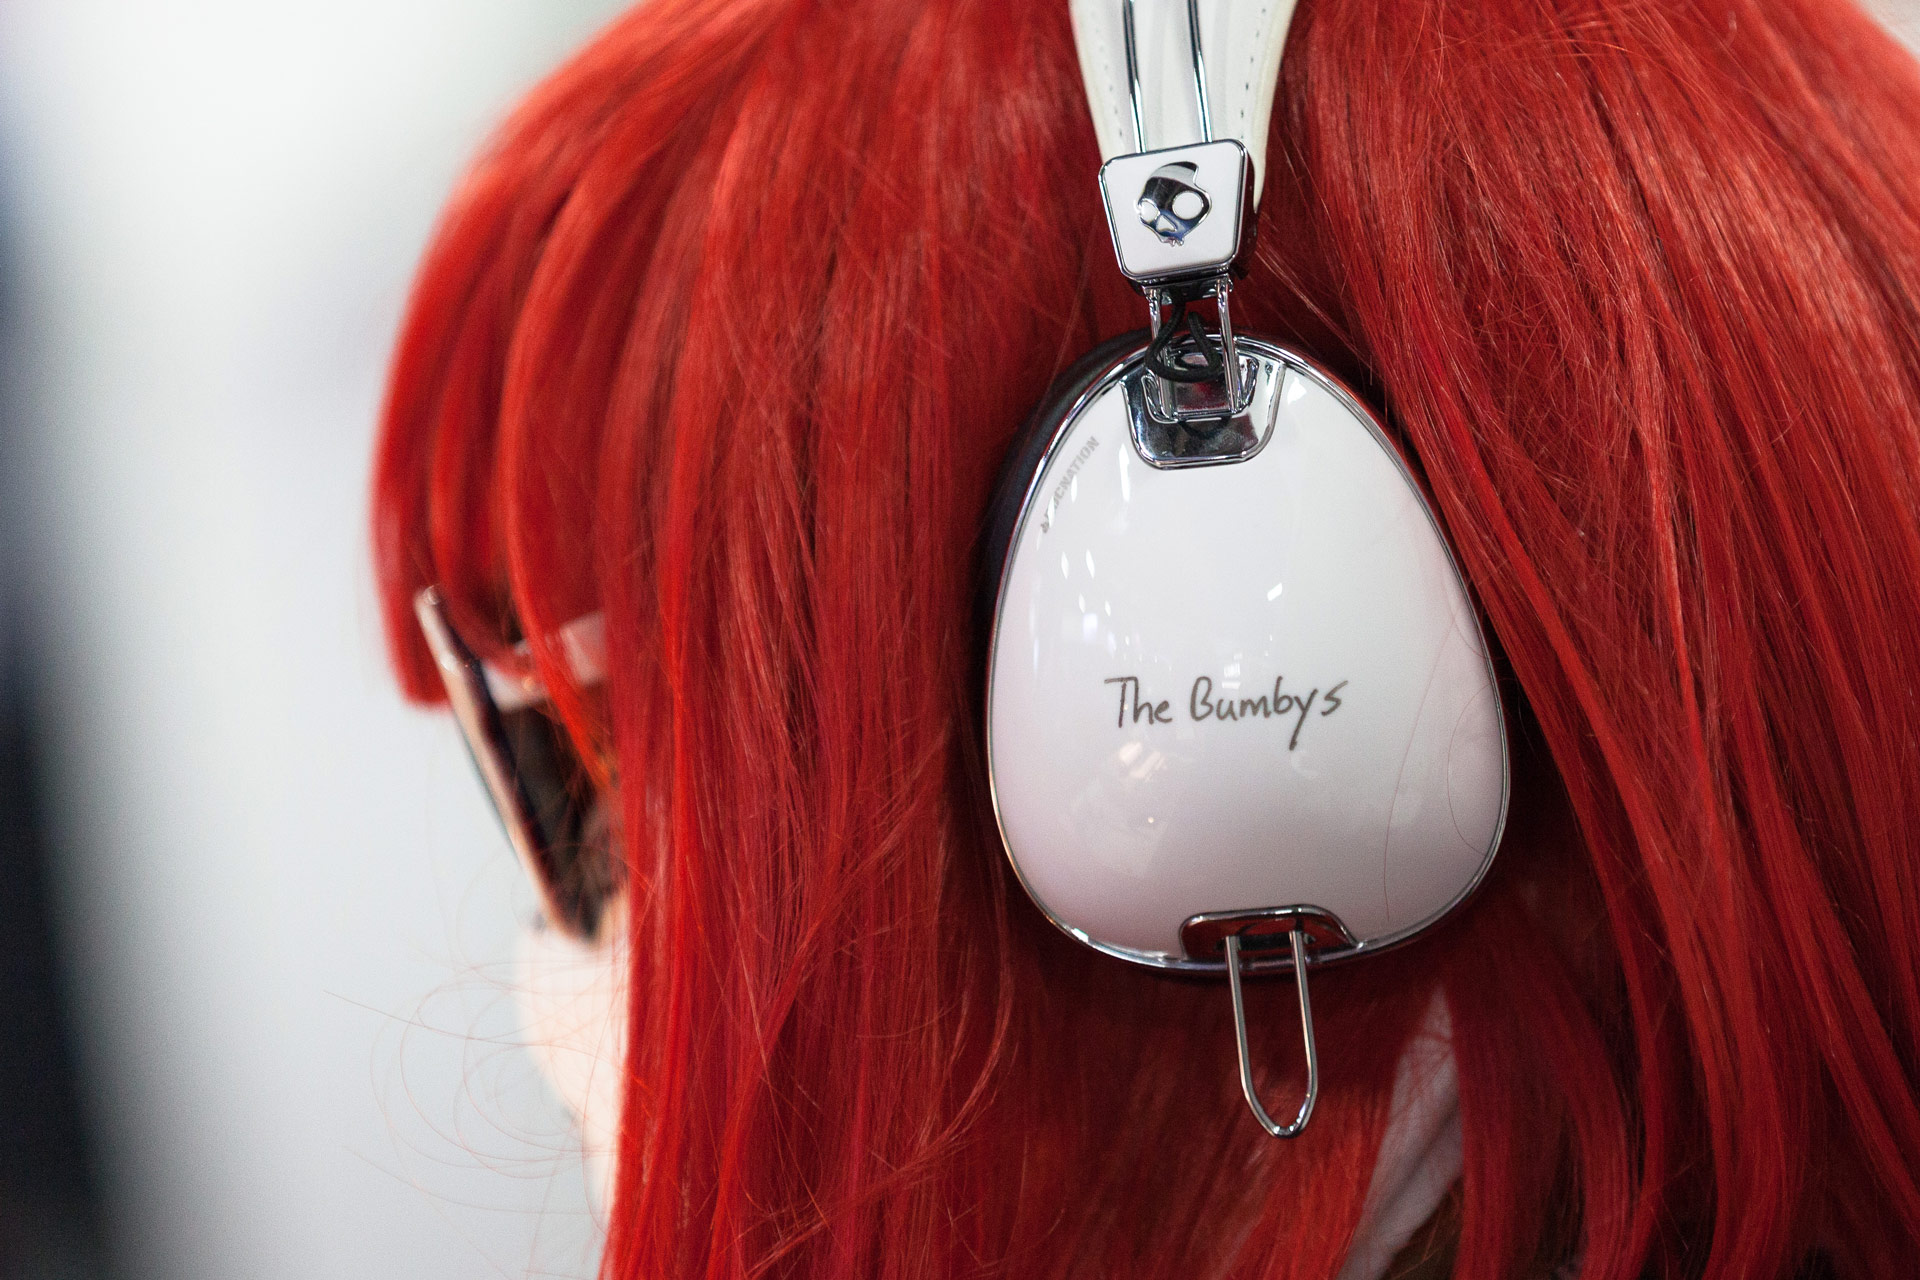 A side view of a red-haired woman with sunglasses and white headphones with "The Bumby's" written on the side.